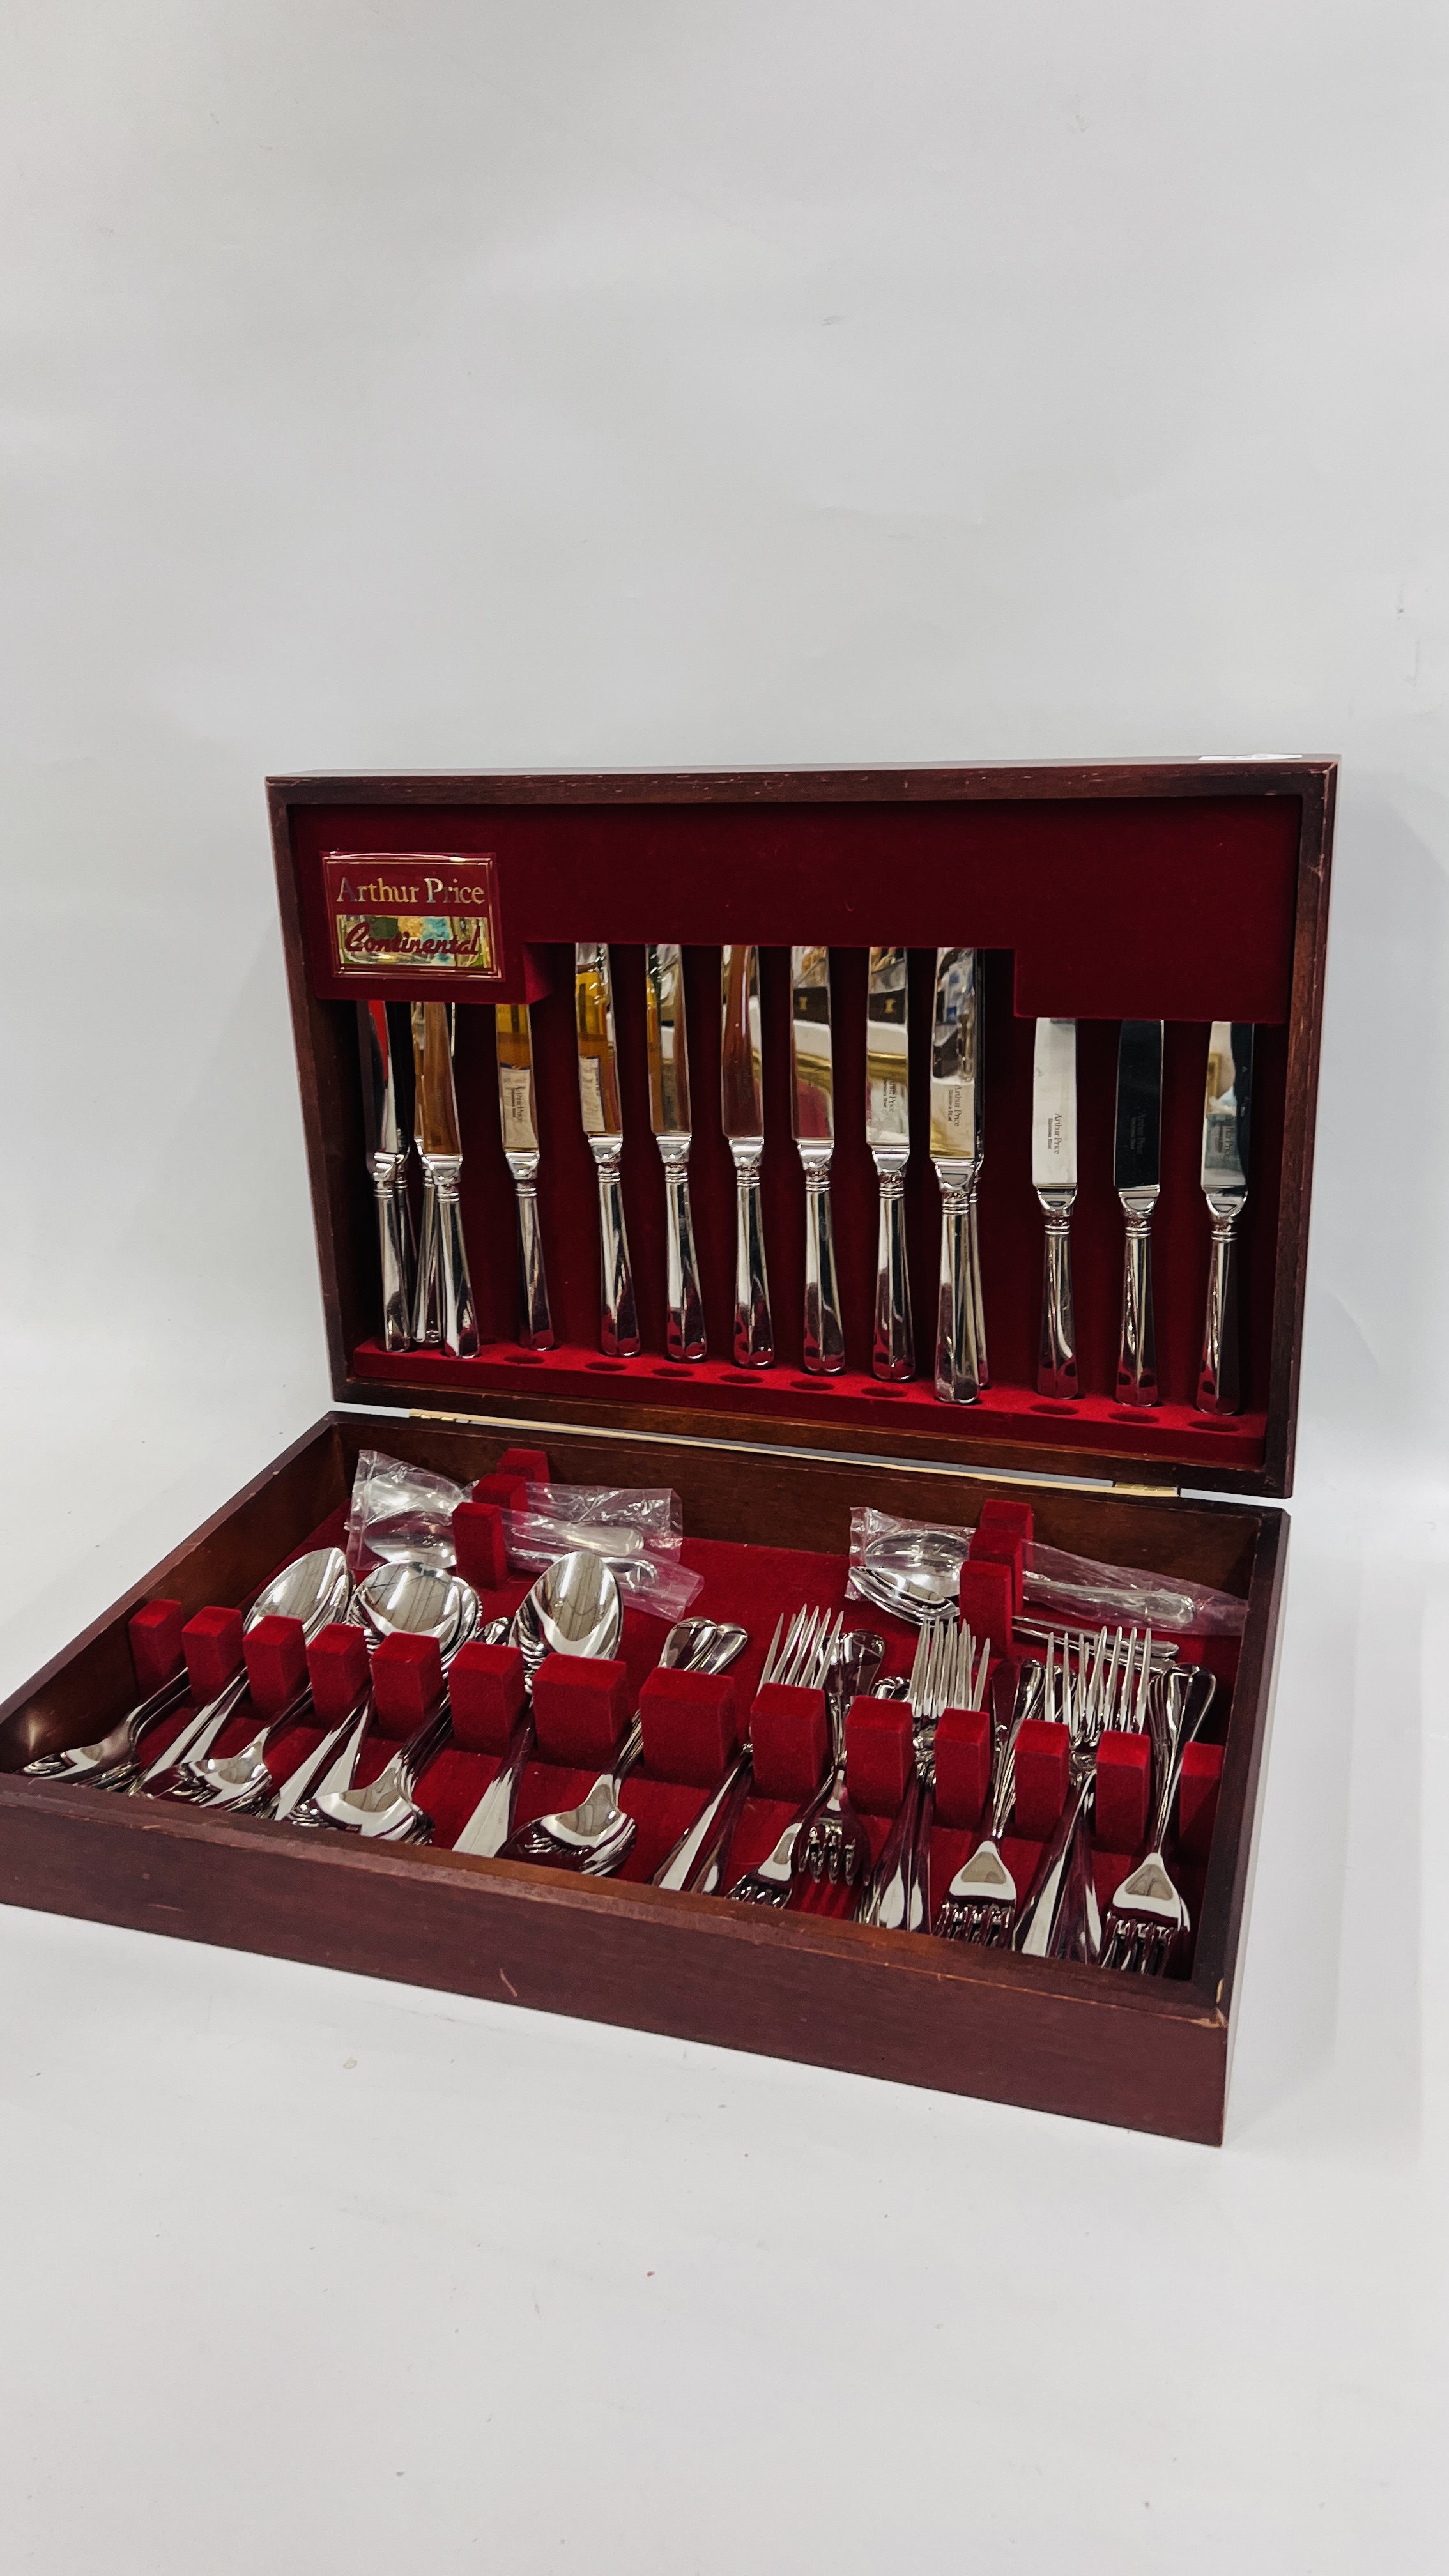 CASED CANTEEN OF ARTHUR PRICE CONTINENTAL STAINLESS STEEL CUTLERY, NOT COMPLETE.